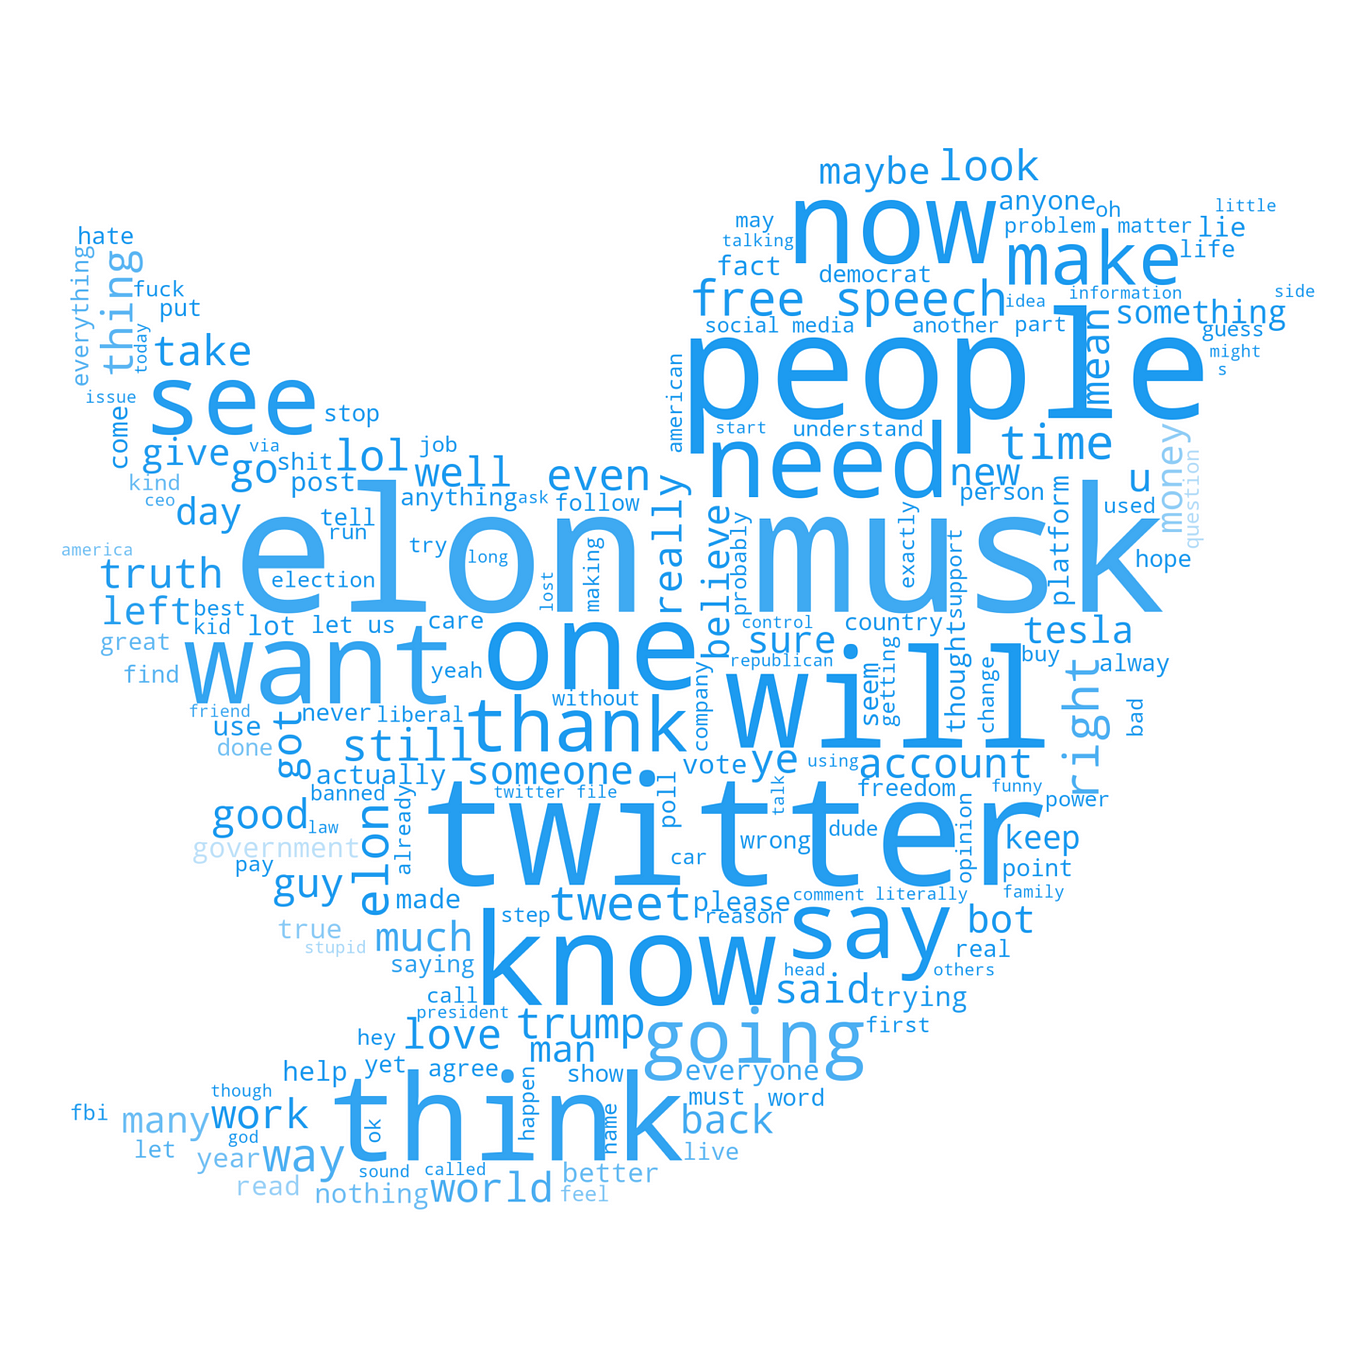 Visualization in the shape of the twitter logo of the most frequent words in the dataset